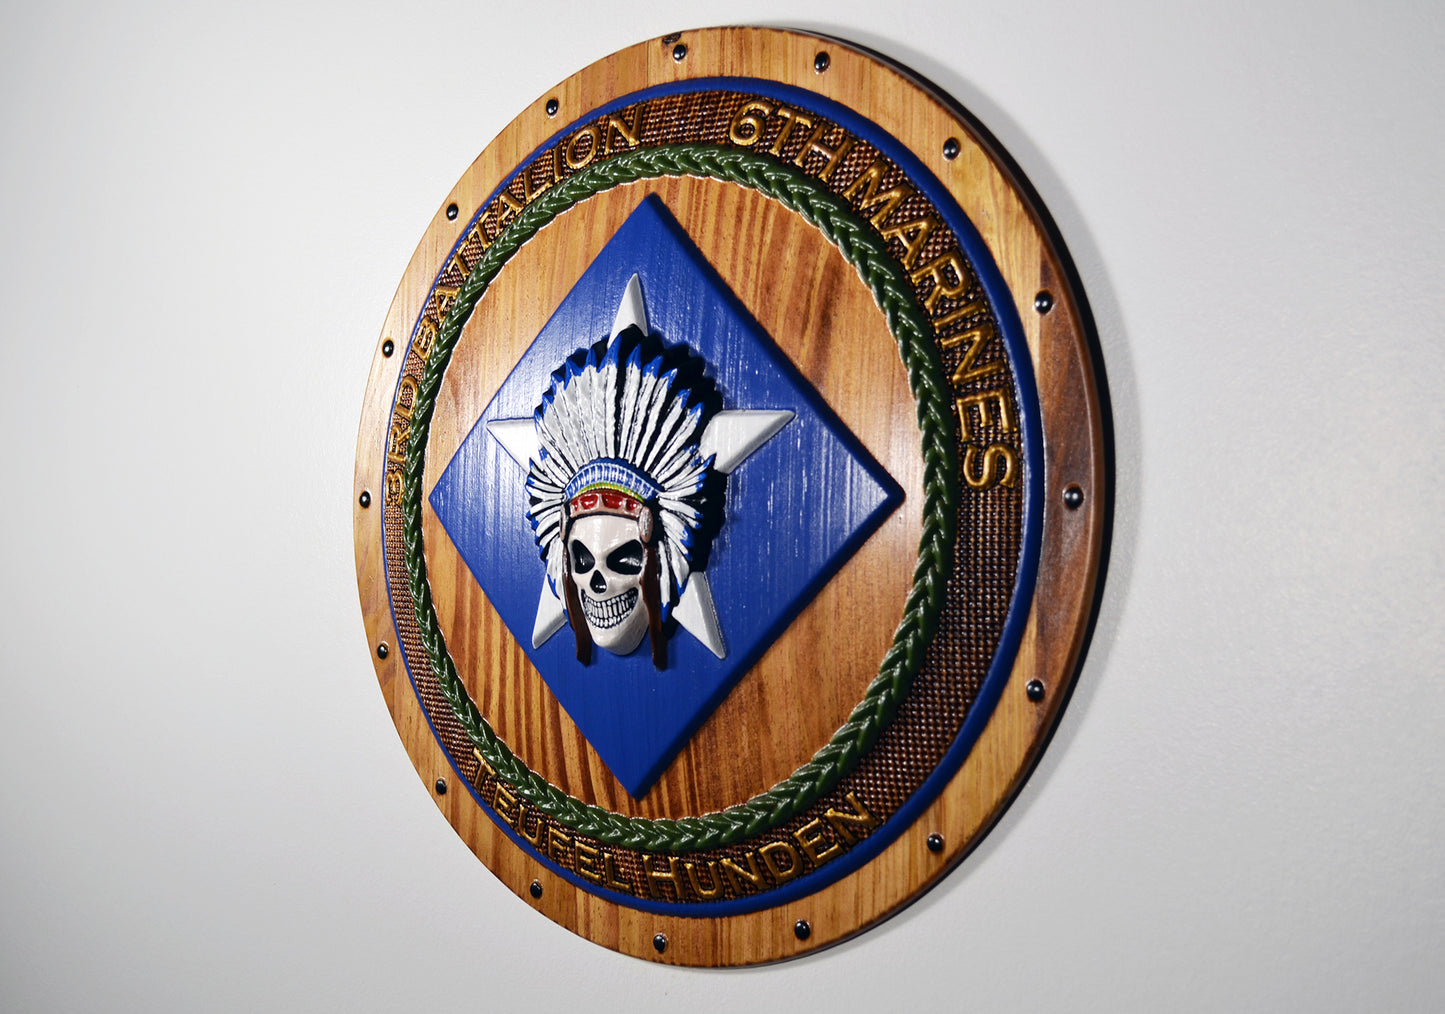 USMC 3rd Battalion 6th Marine Division Painted Shield,  US Marine Corps, CNC carving, military plaque